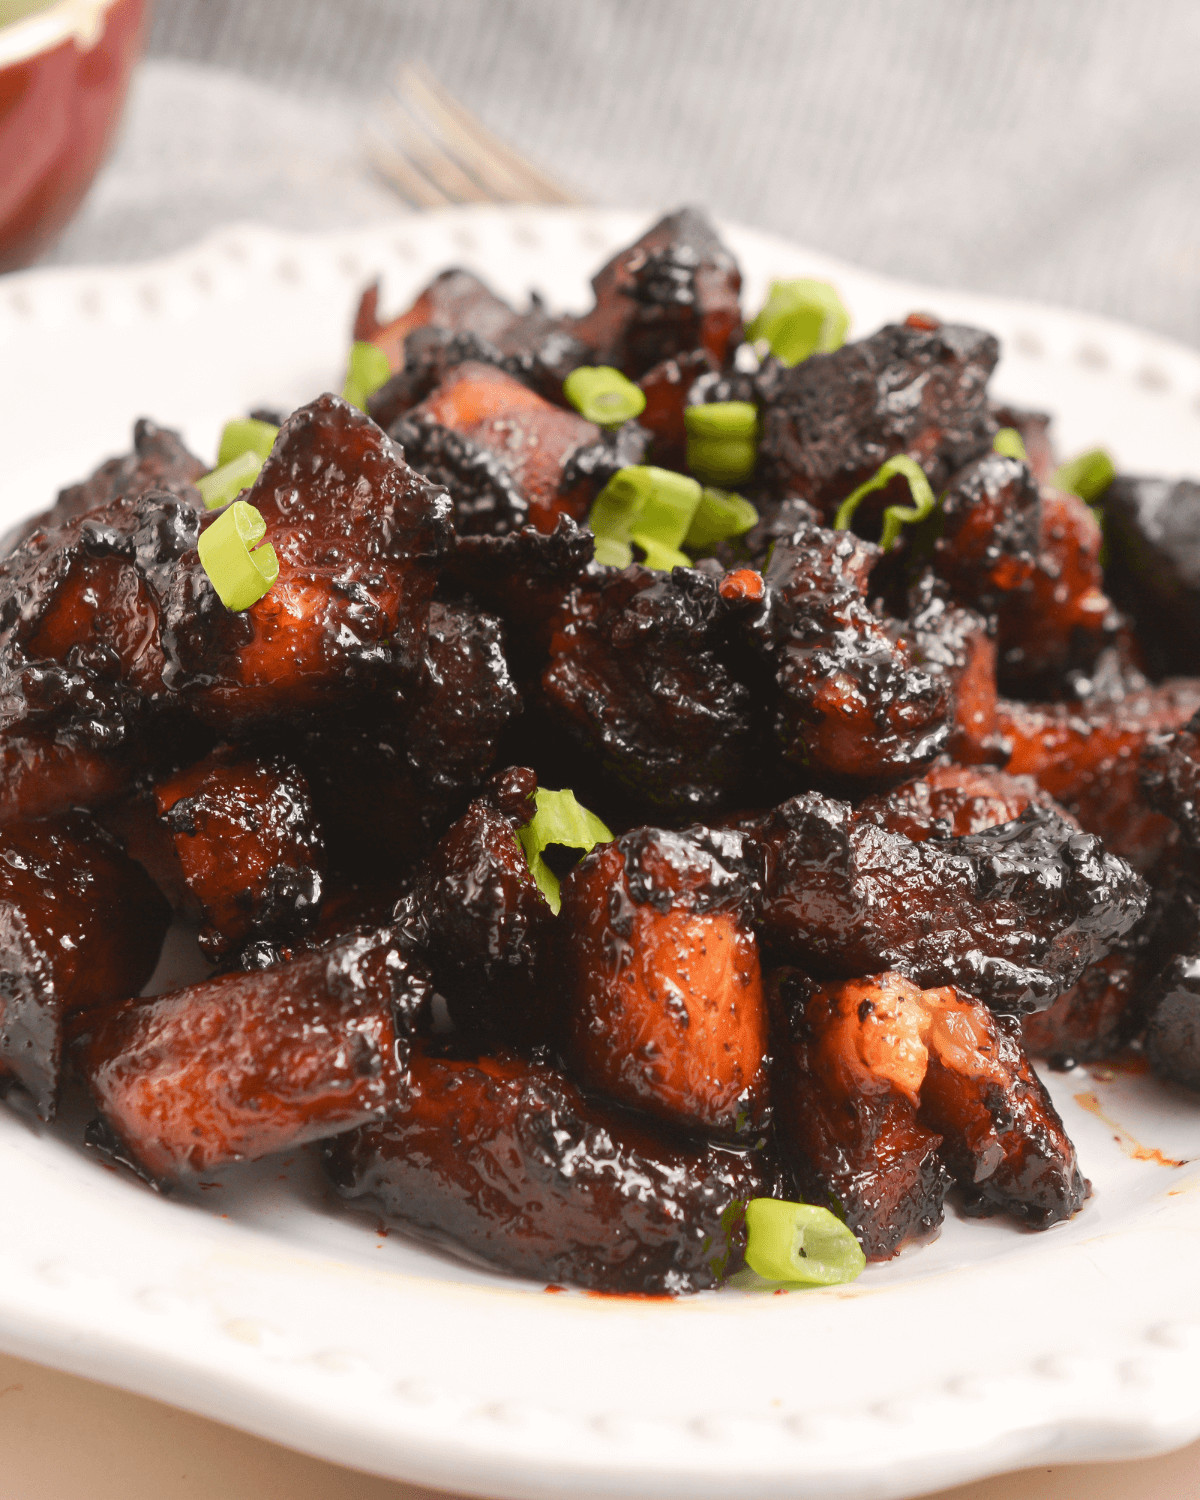 A plate of pork burnt ends.